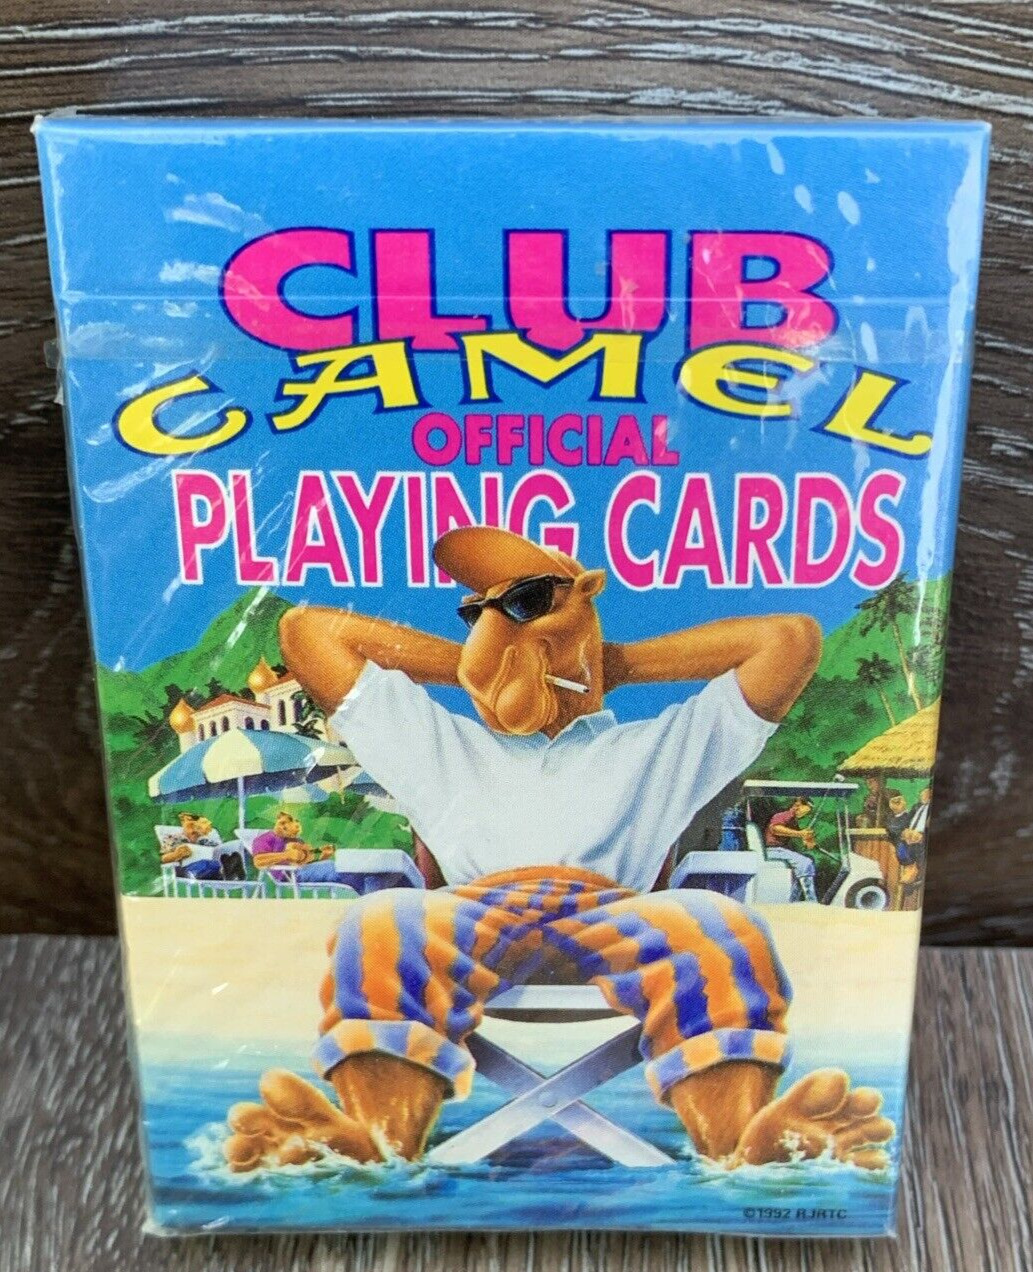 Vintage Camel Cigarettes Club Joe Camel Official playing Cards